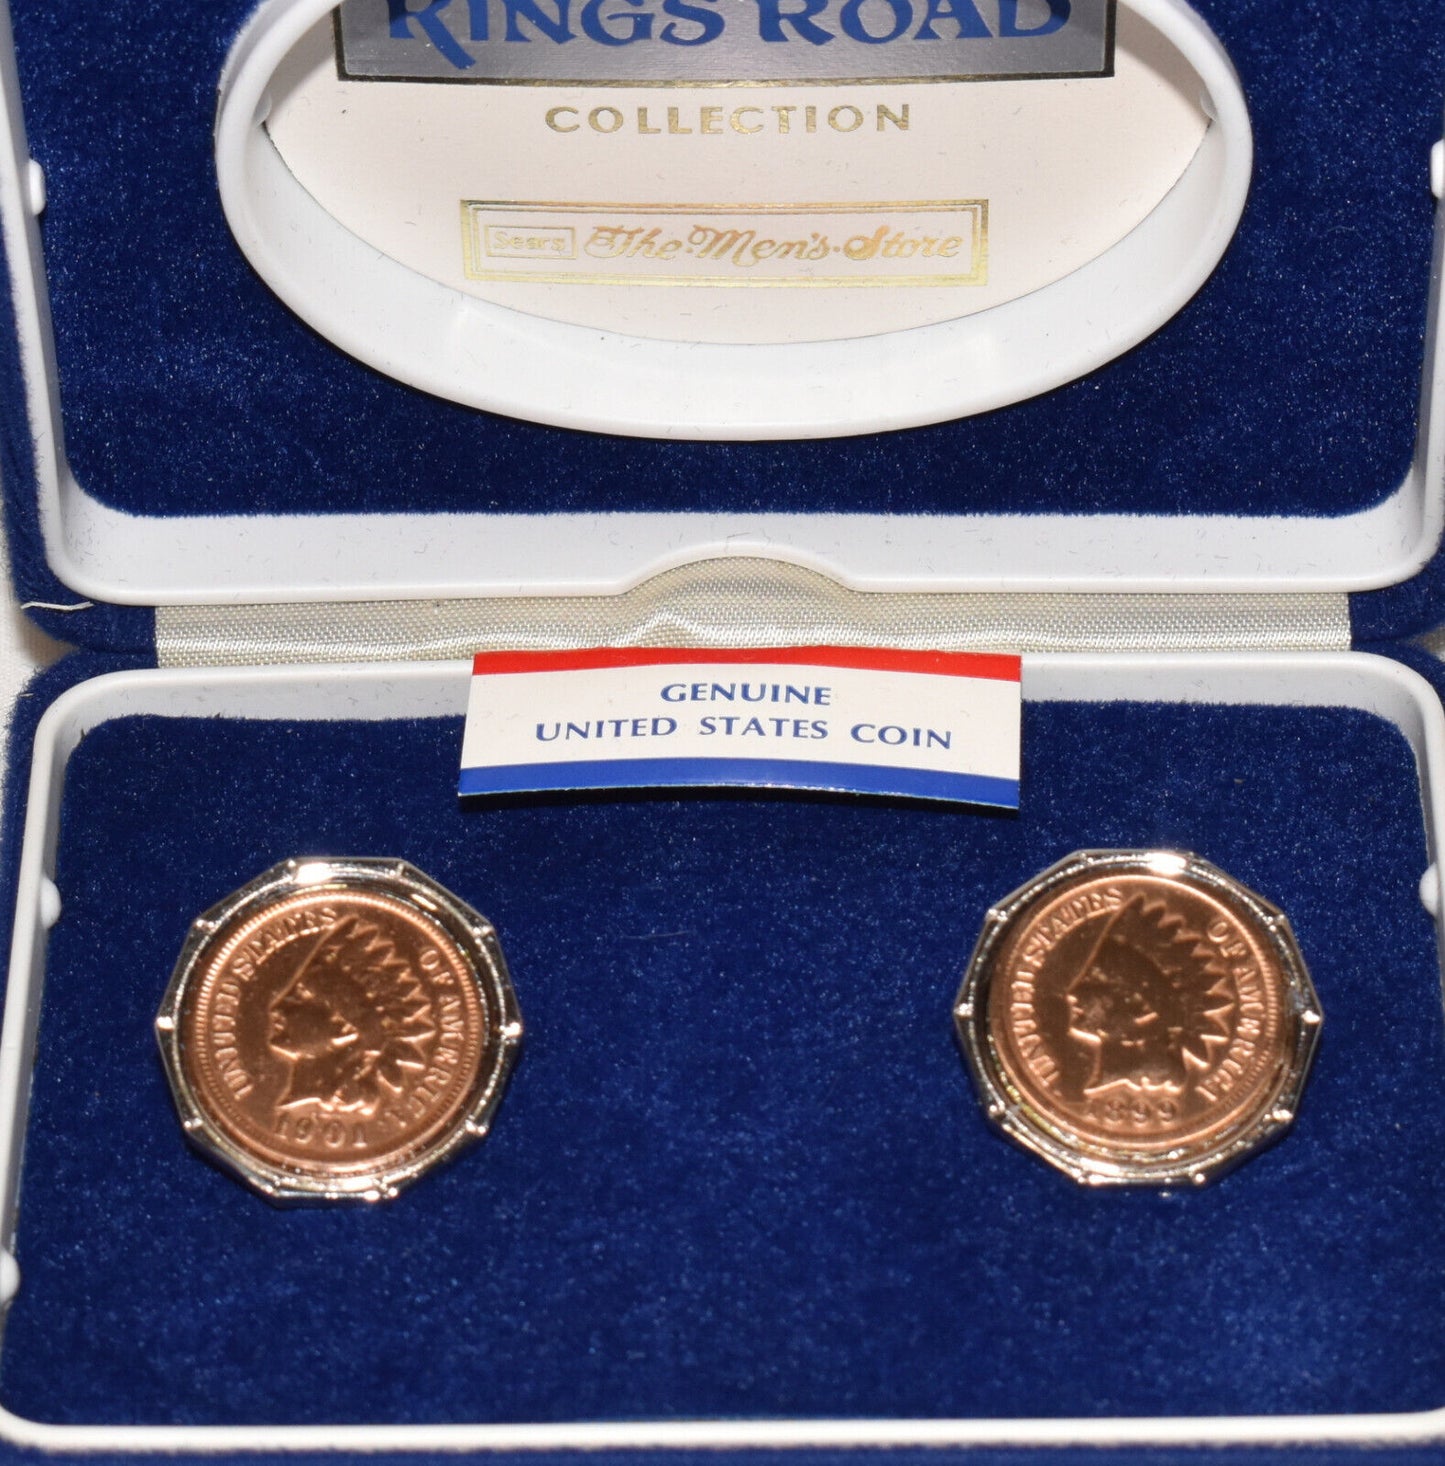 Vintage Sears Kings Road Cufflinks Genuine United States Indian Head Coins New Old Stock